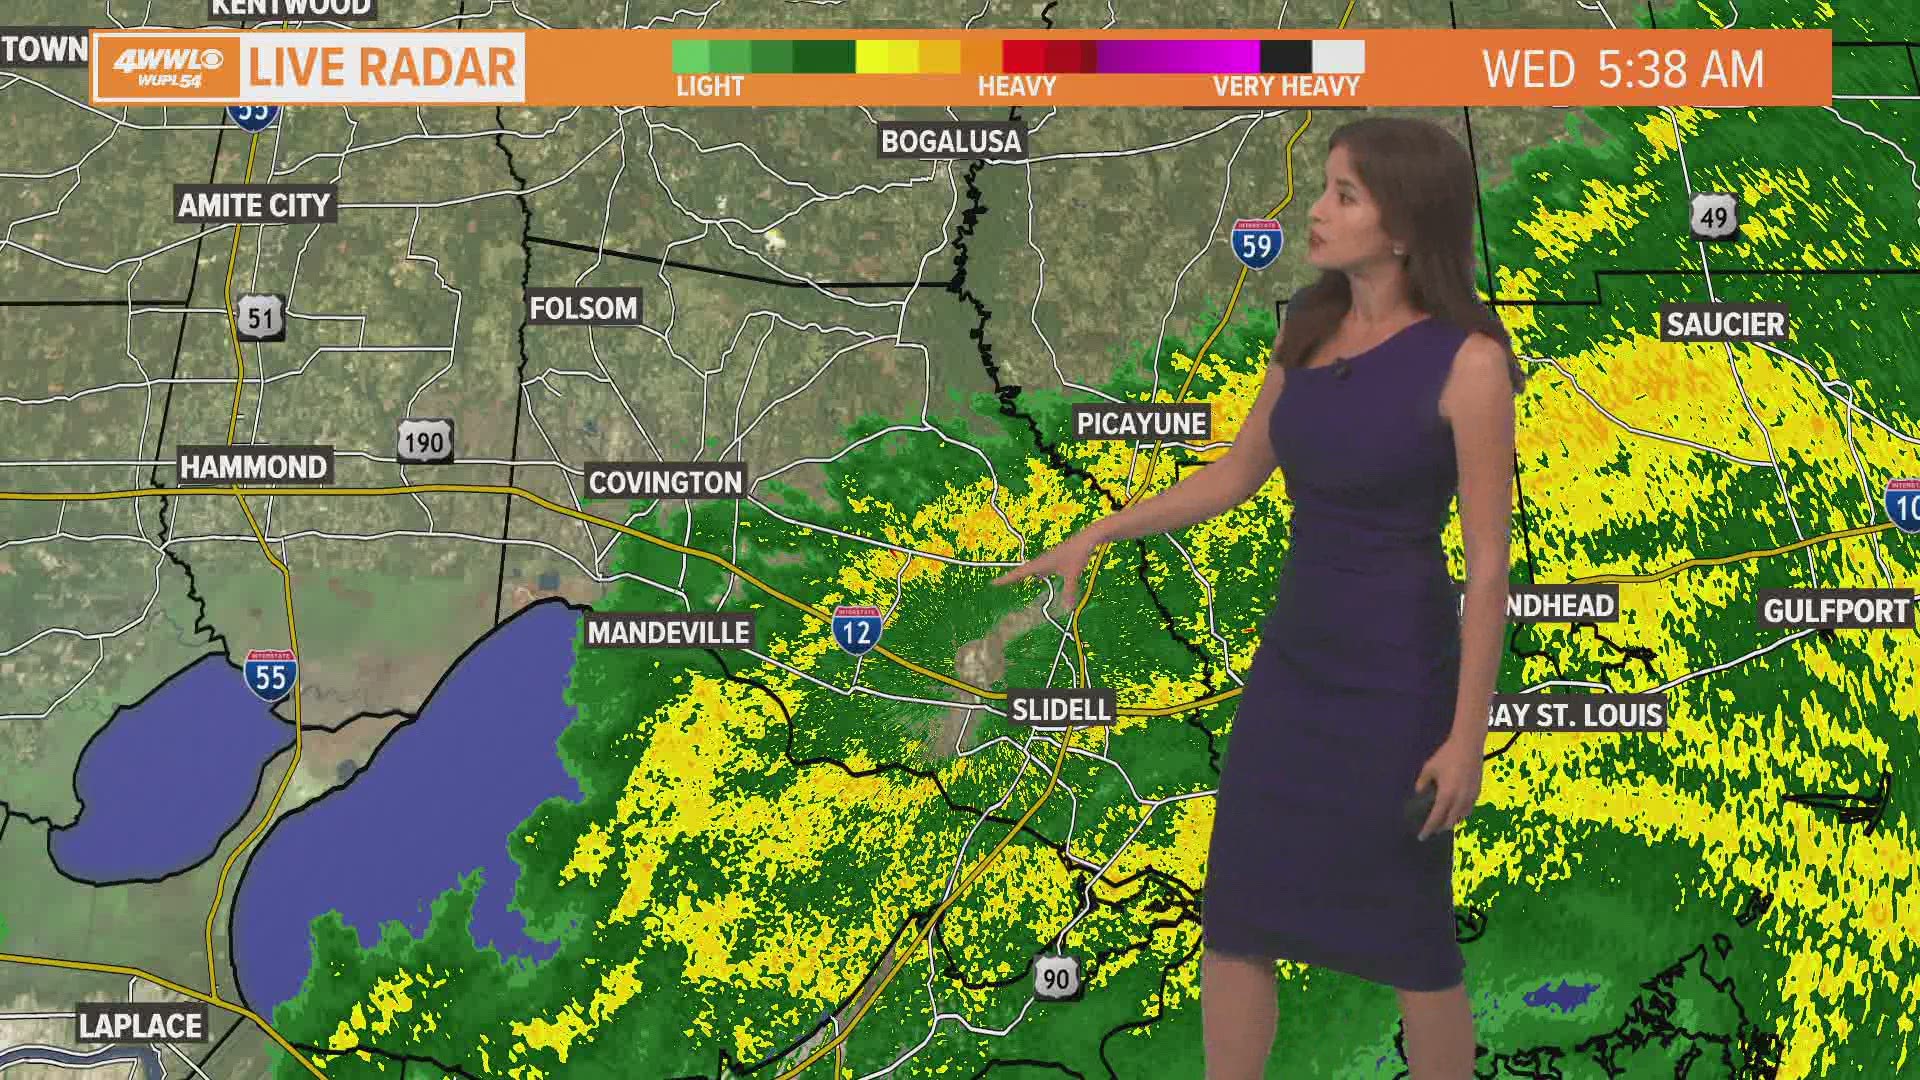 Meteorologist Alexandra Cranford has the forecast at 5:30 a.m. Wednesday, March 24, 2021.